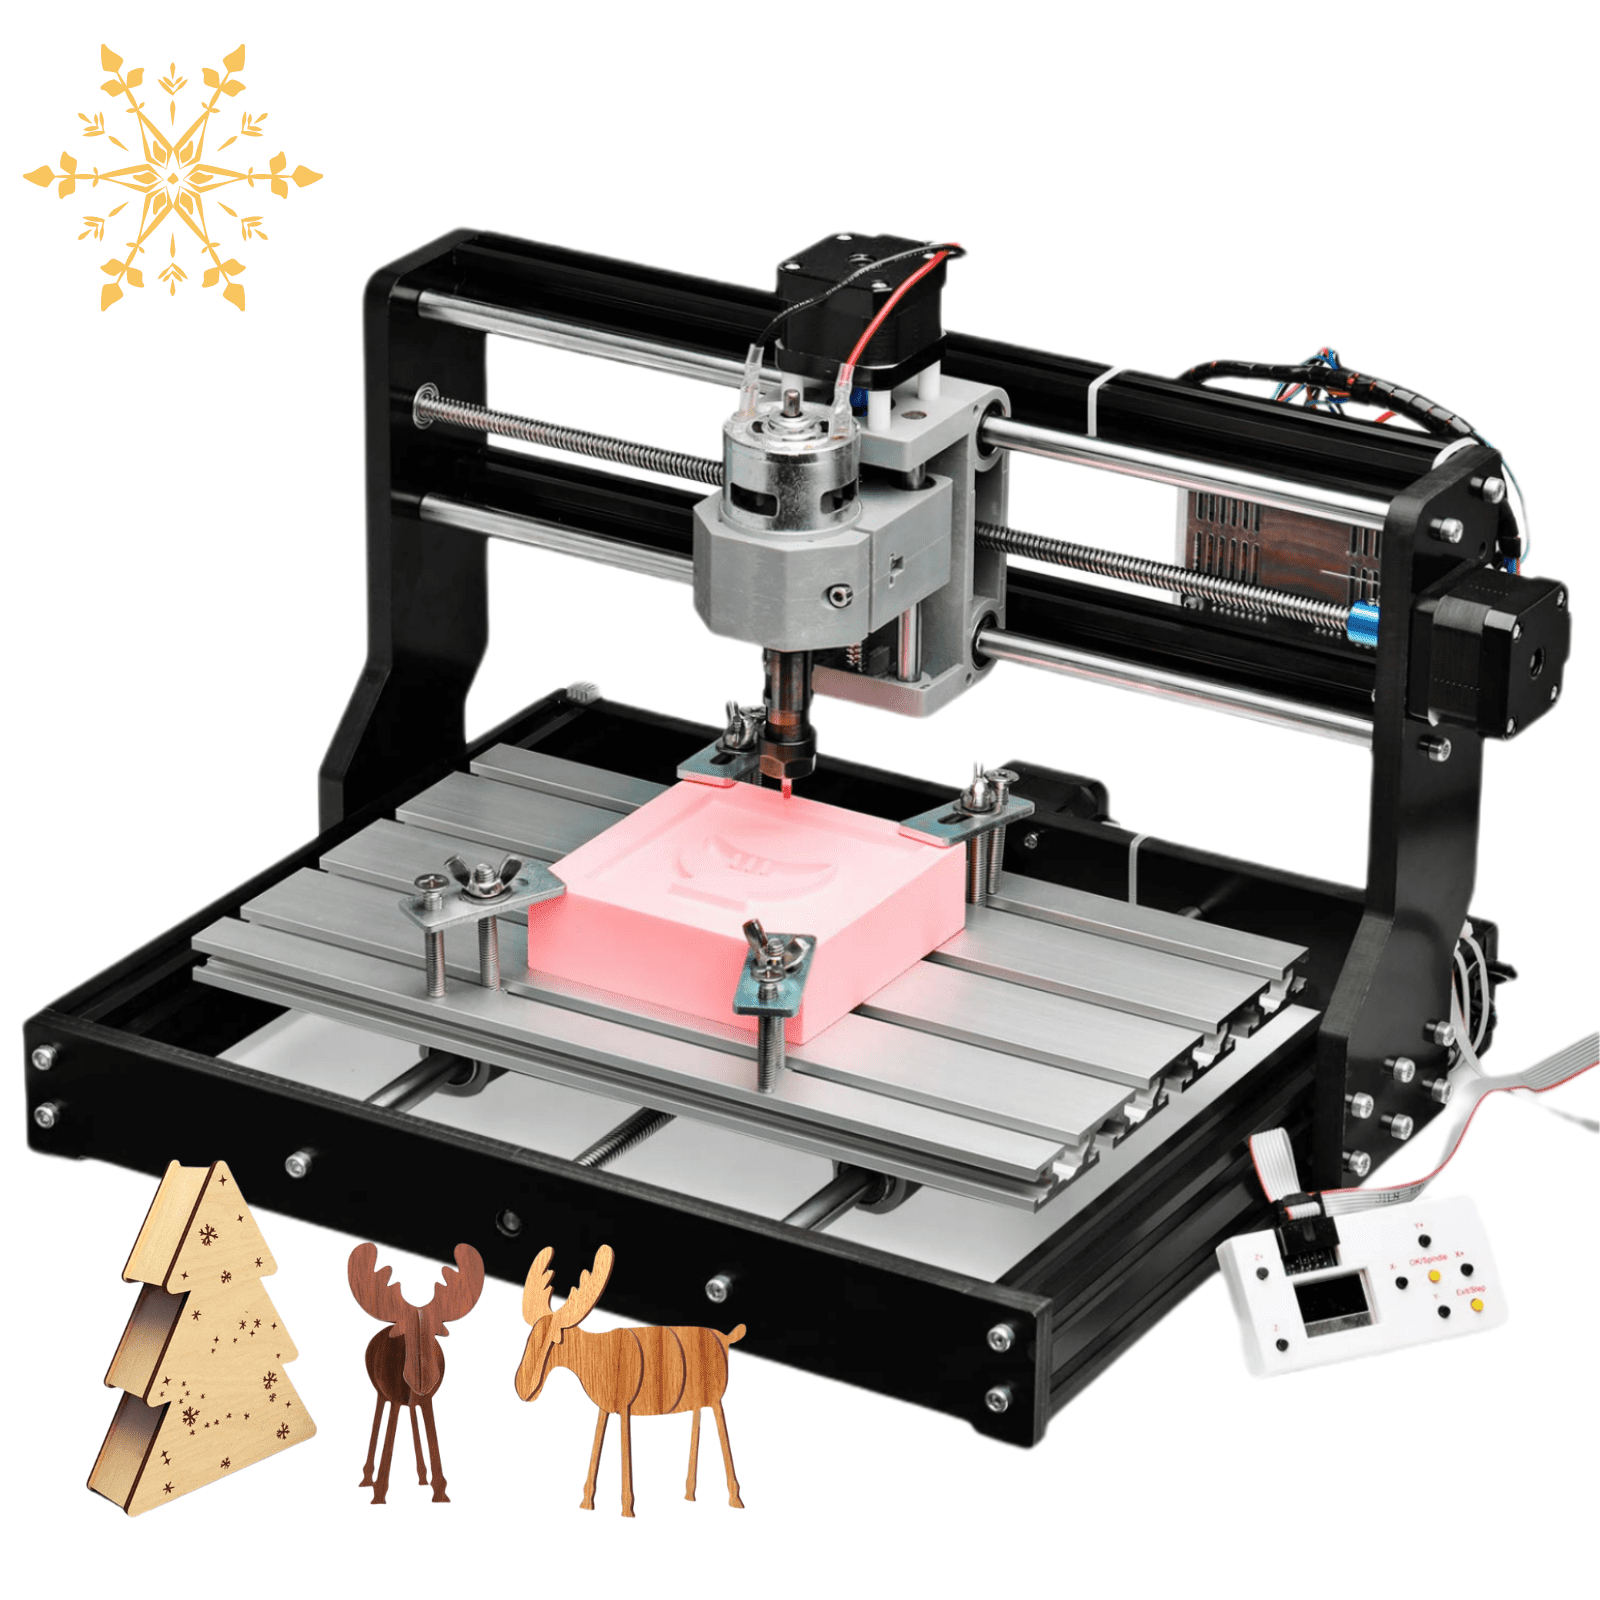 CNC 3018 Pro Machine Router 3axis Engraving PCB Wood DIY Milling Engraver Er11 for sale online 